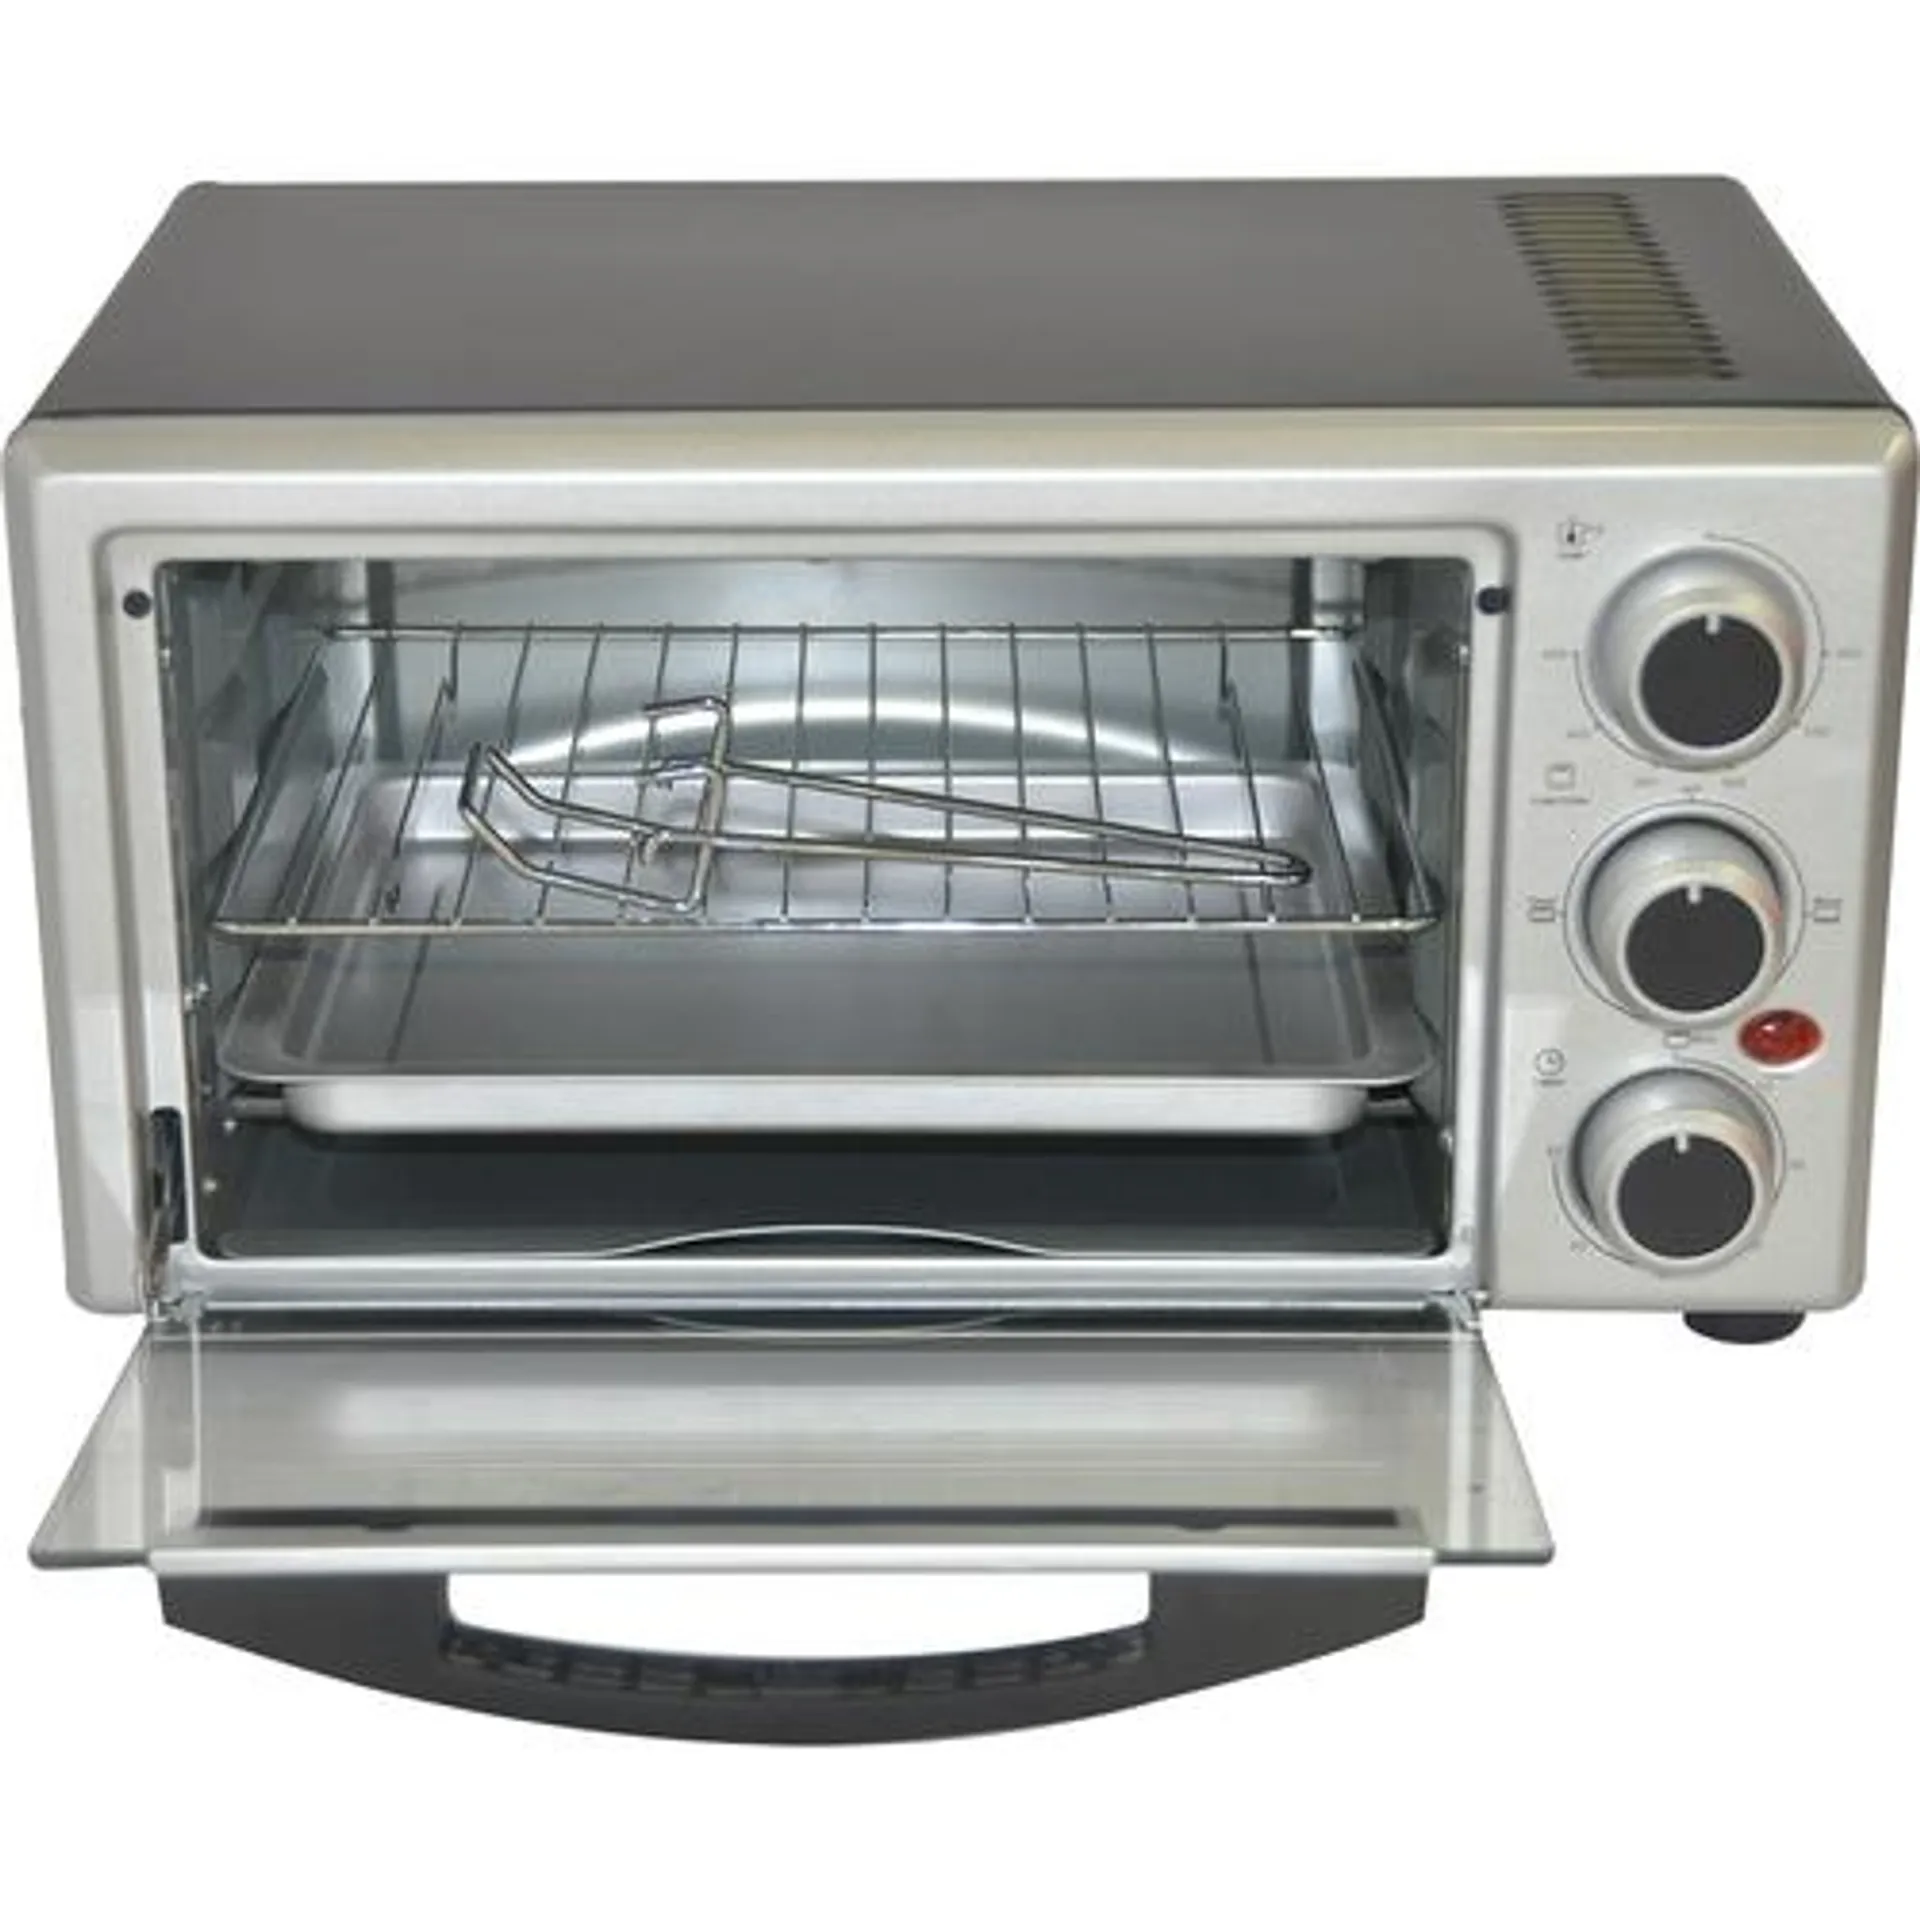 6-Slice 0.5 CuFt Toaster Oven with Bake, Broil and Toast Functions